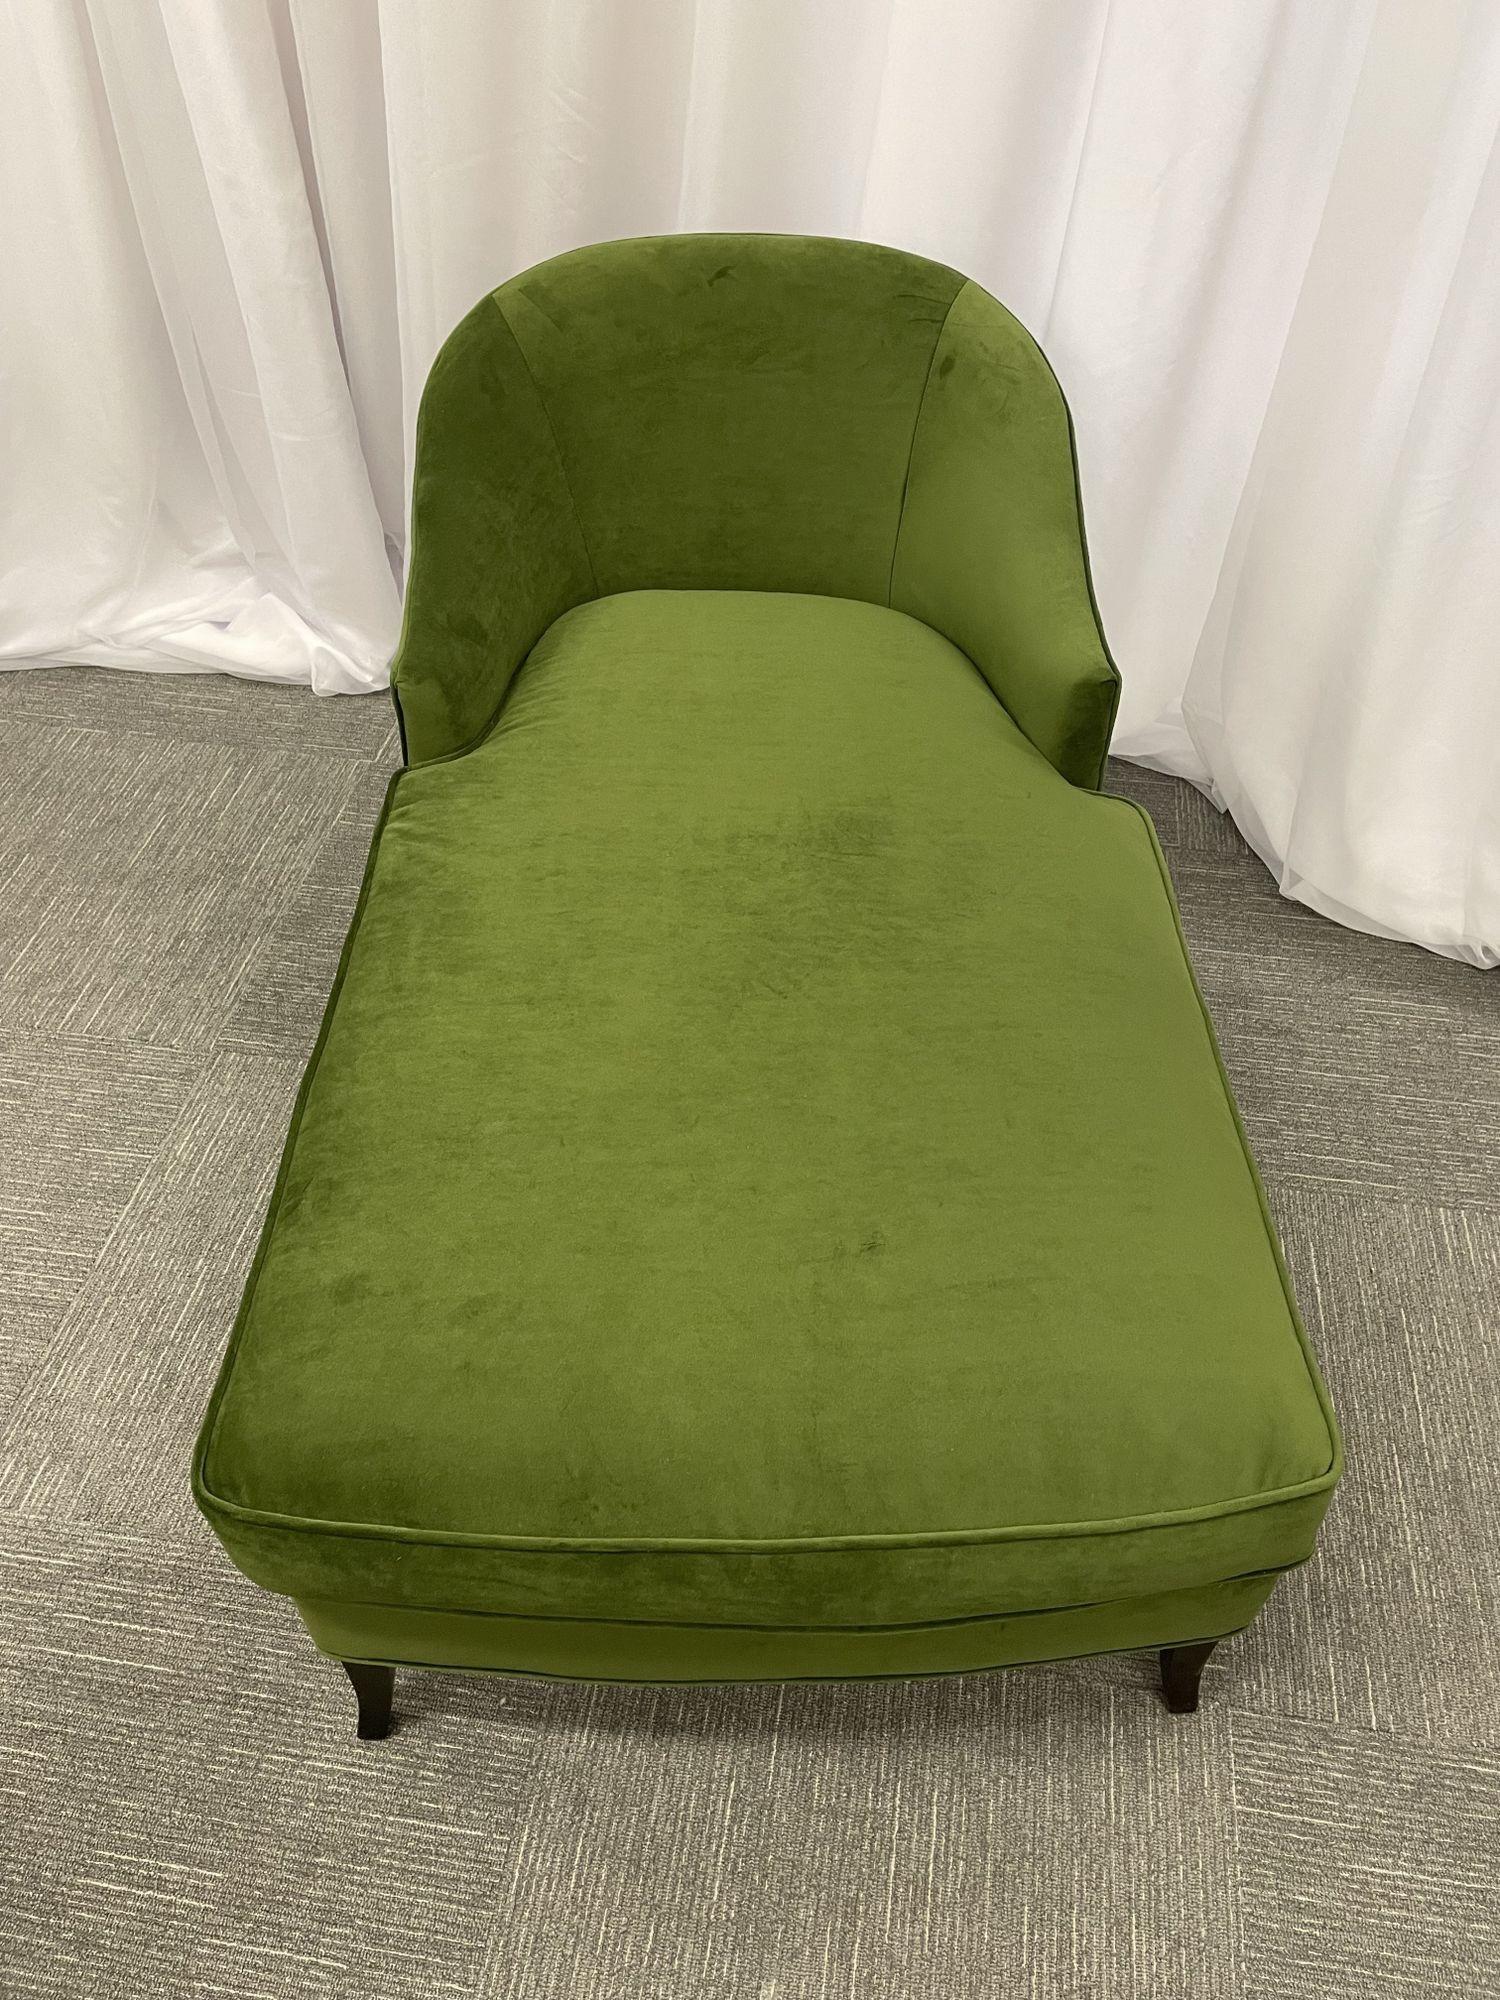 Mid-Century Modern Style American Designer Chaise / Daybed / Lounge, Green 1